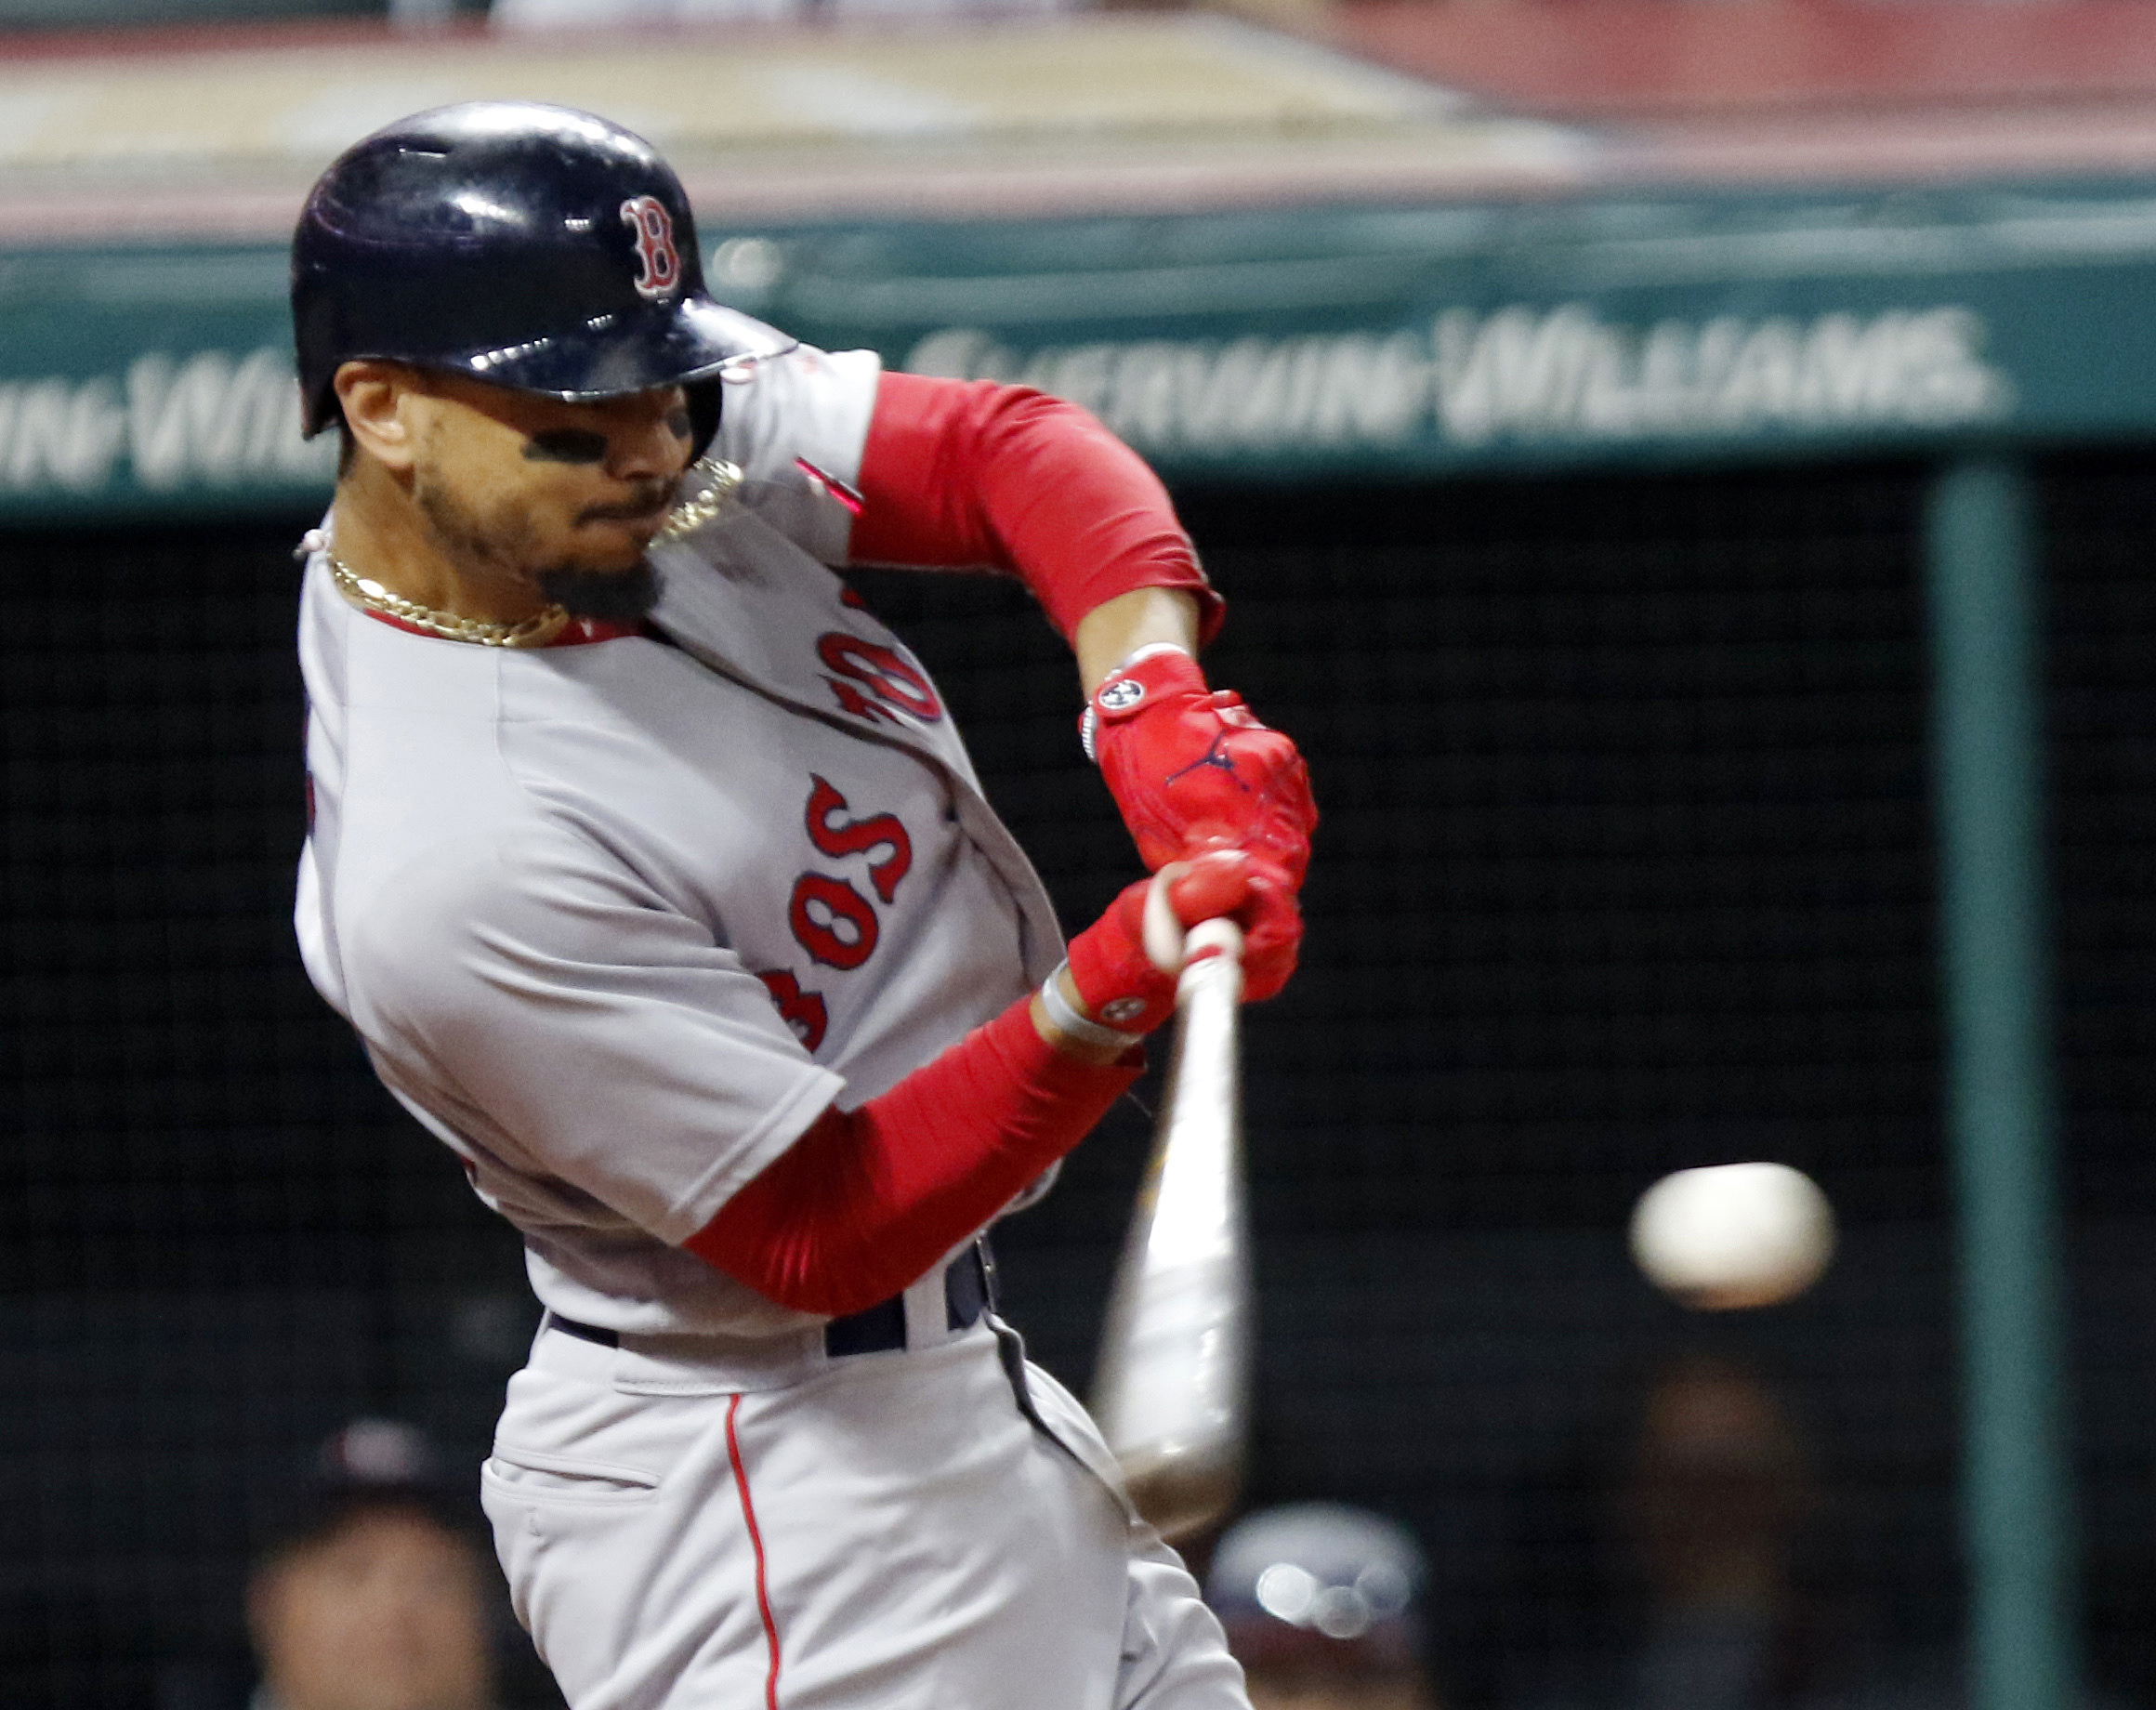 Nobody better: Betts, Yelich clear choices for MVP awards